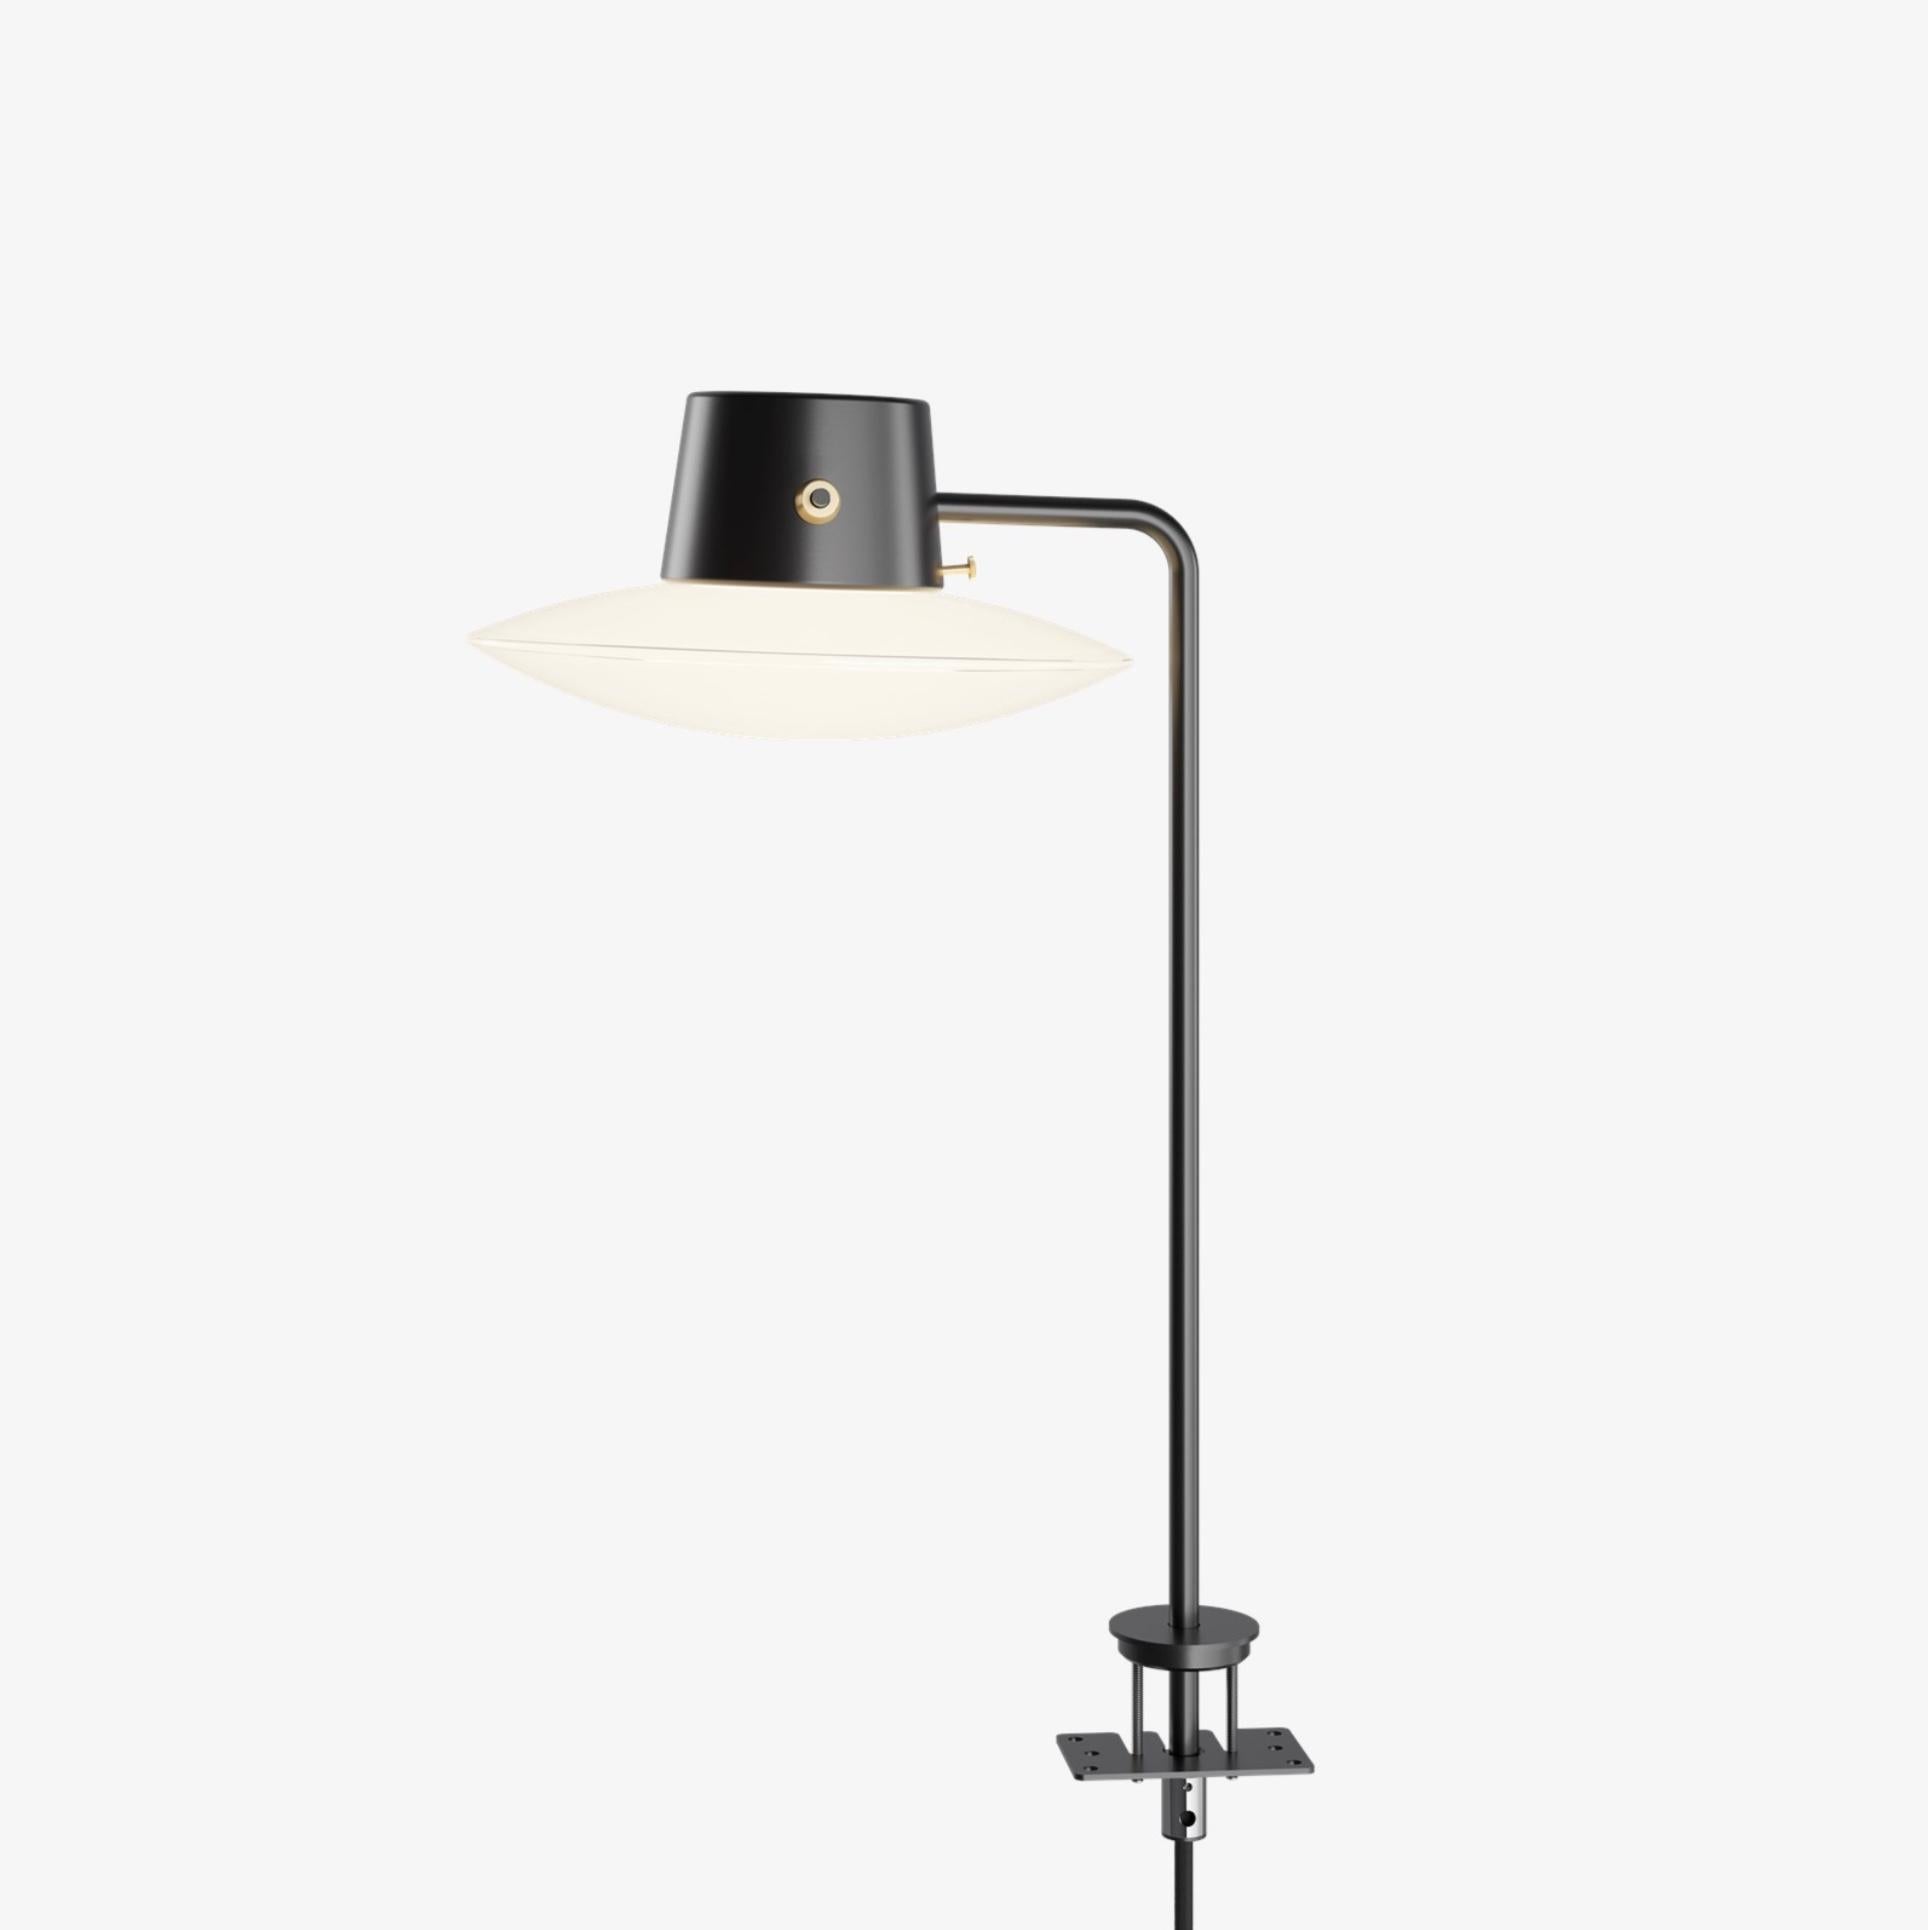 Arne Jacobsen AJ Oxford pin table lamp 410mm in black and opaline for Louis Poulsen. Designed in 1963, current production.

The AJ Oxford table lamp has a sleek graphic expression, which reflects the architecture of St Catherine's College, in